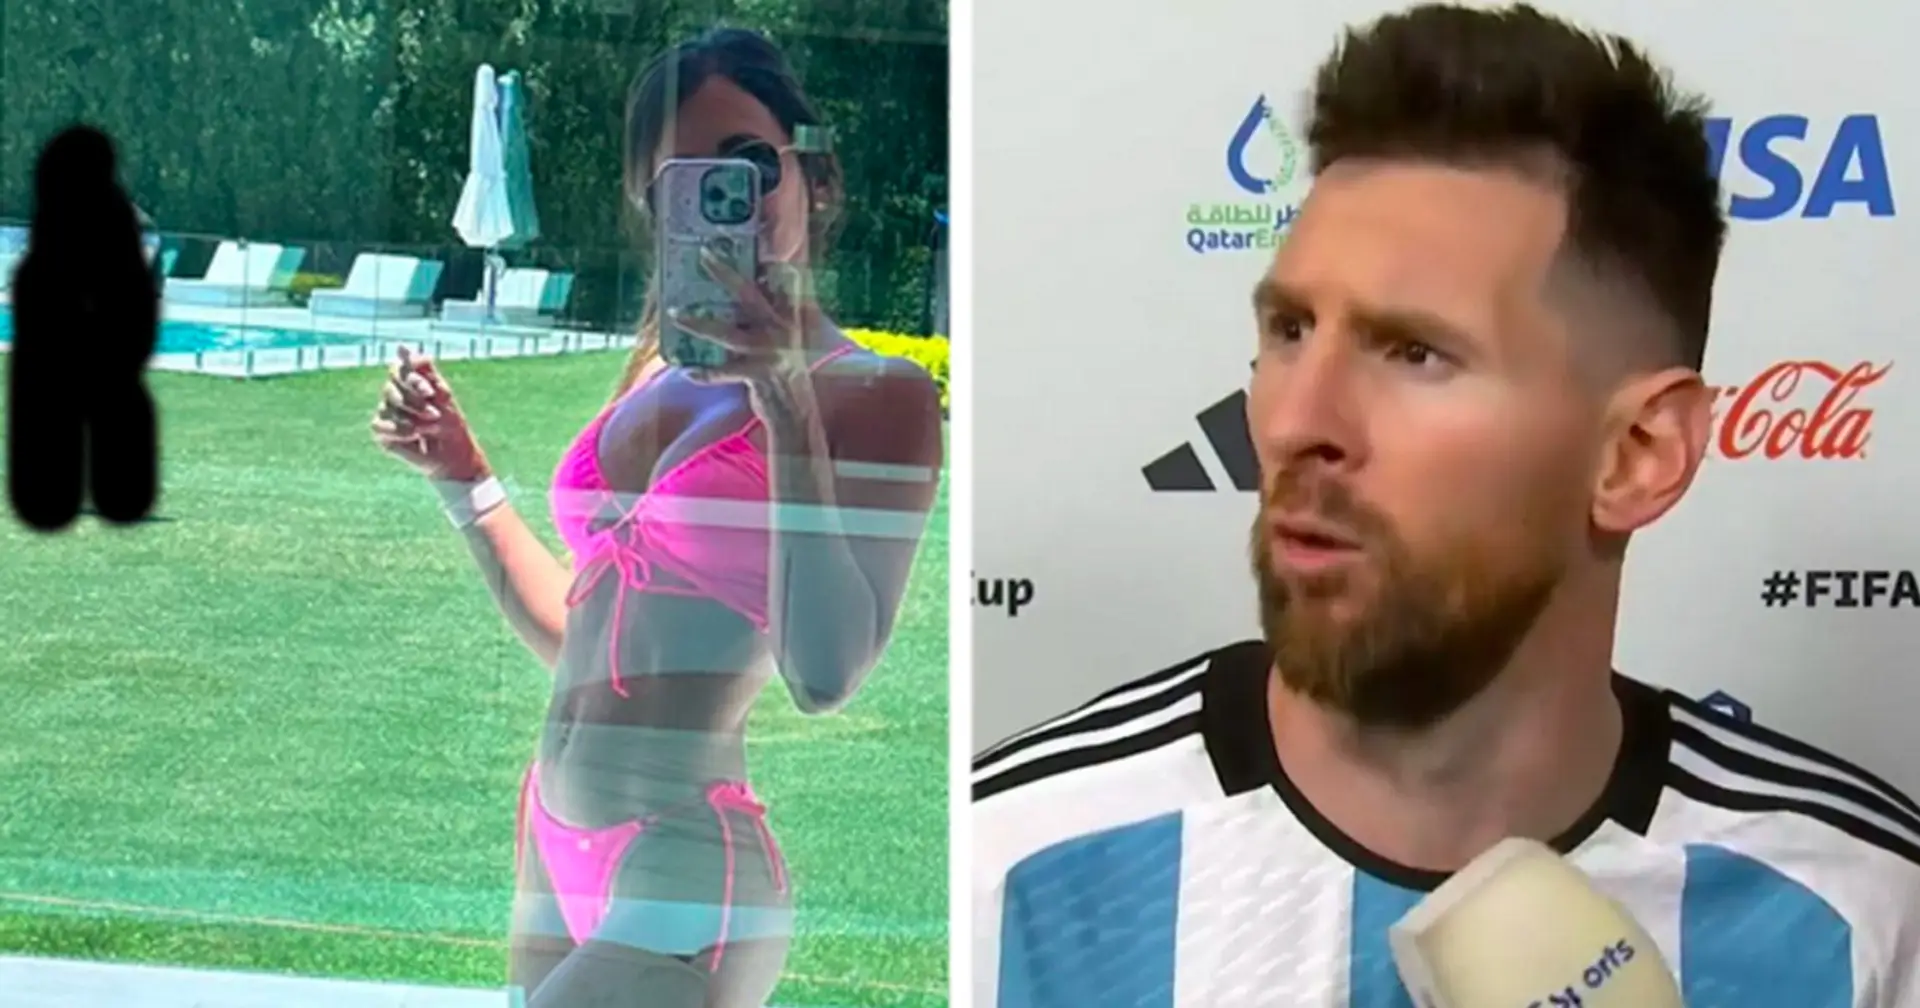 'Scanning on and off the pitch': Sexy Antonella pic goes viral – but Messi grabs even more attention